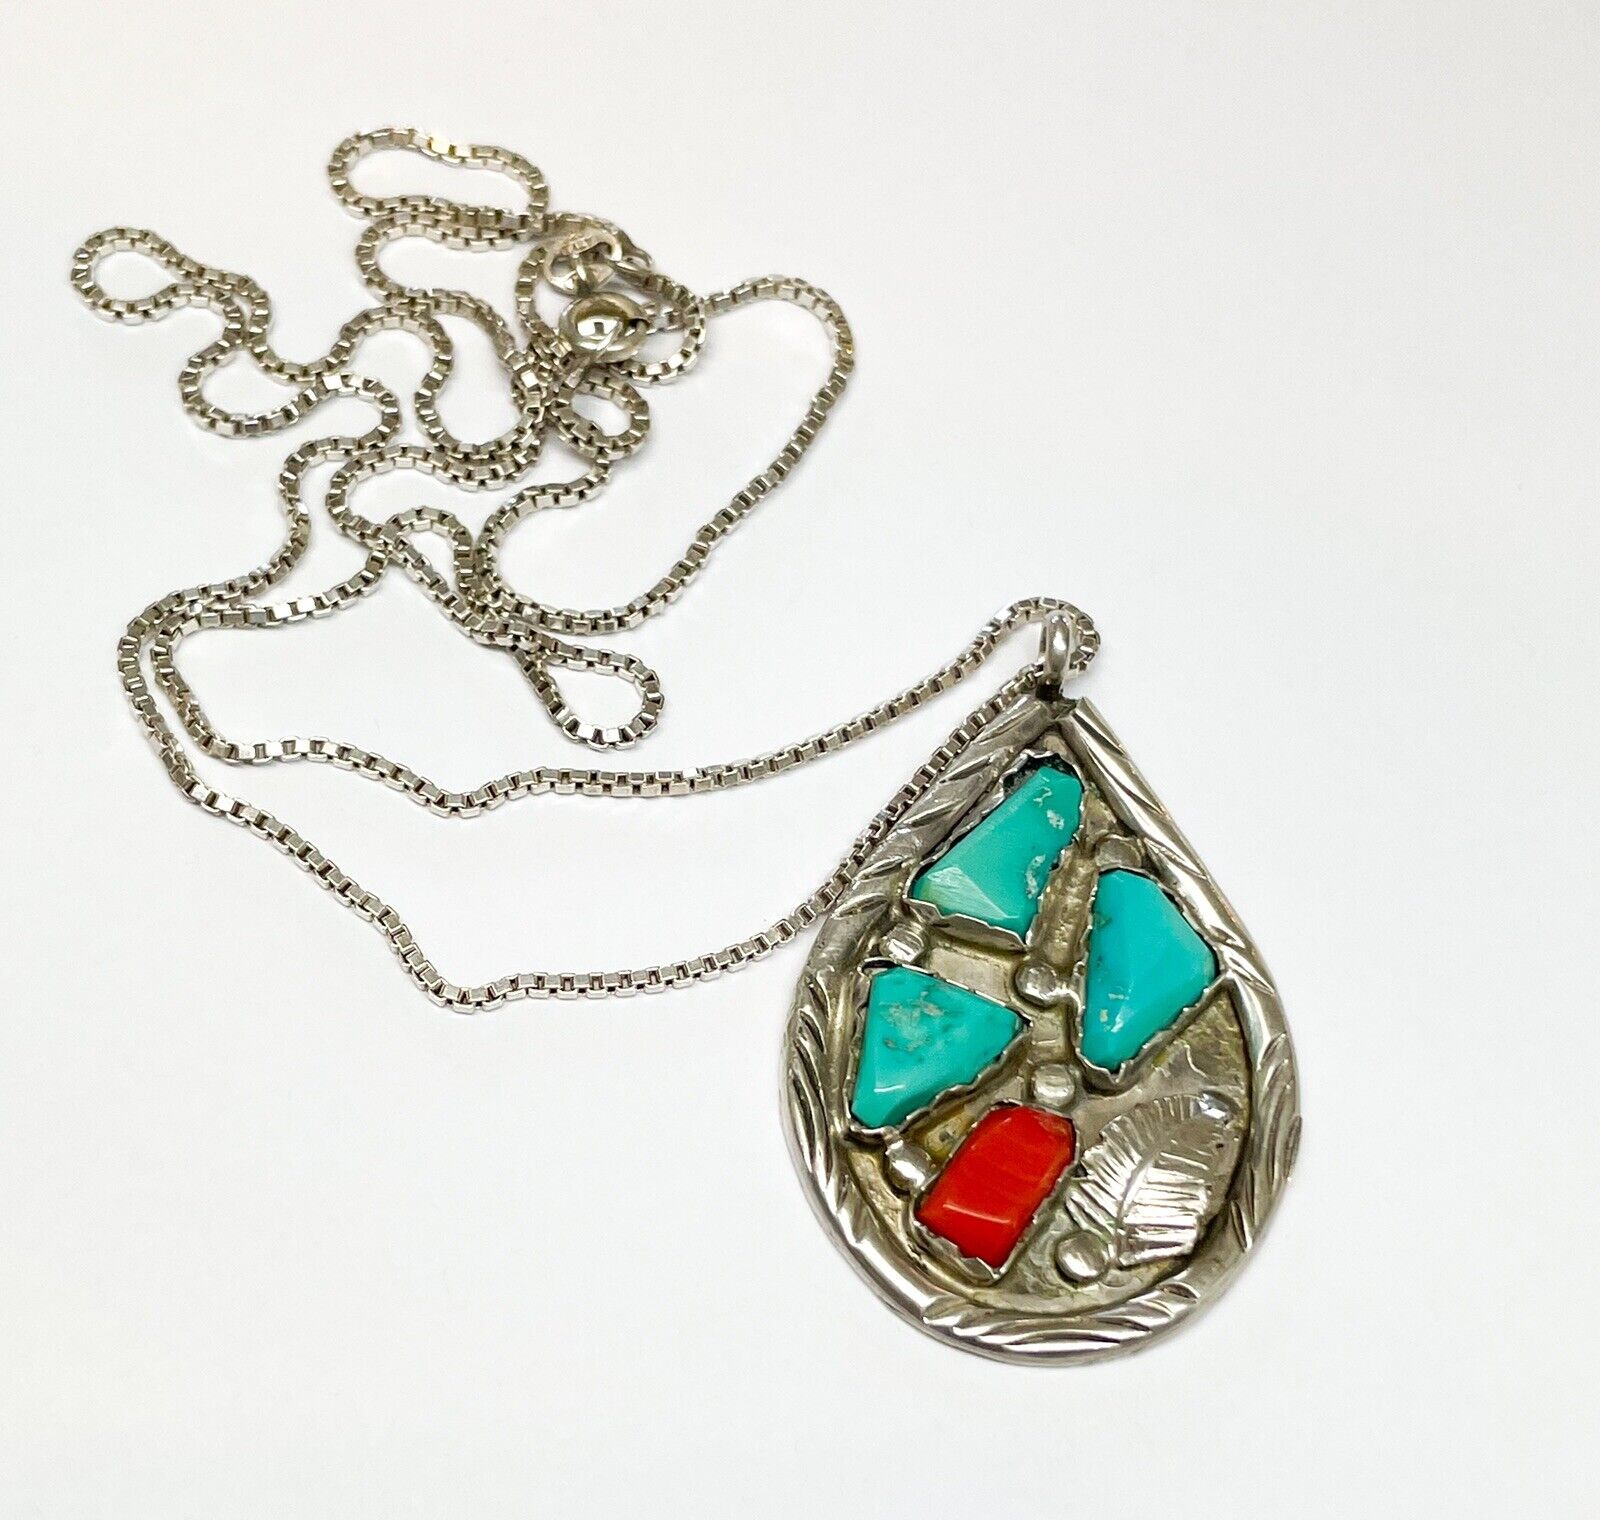 Vintage Zuni Artist Angie C. Cheama Sterling Silver Turquoise Coral Necklace